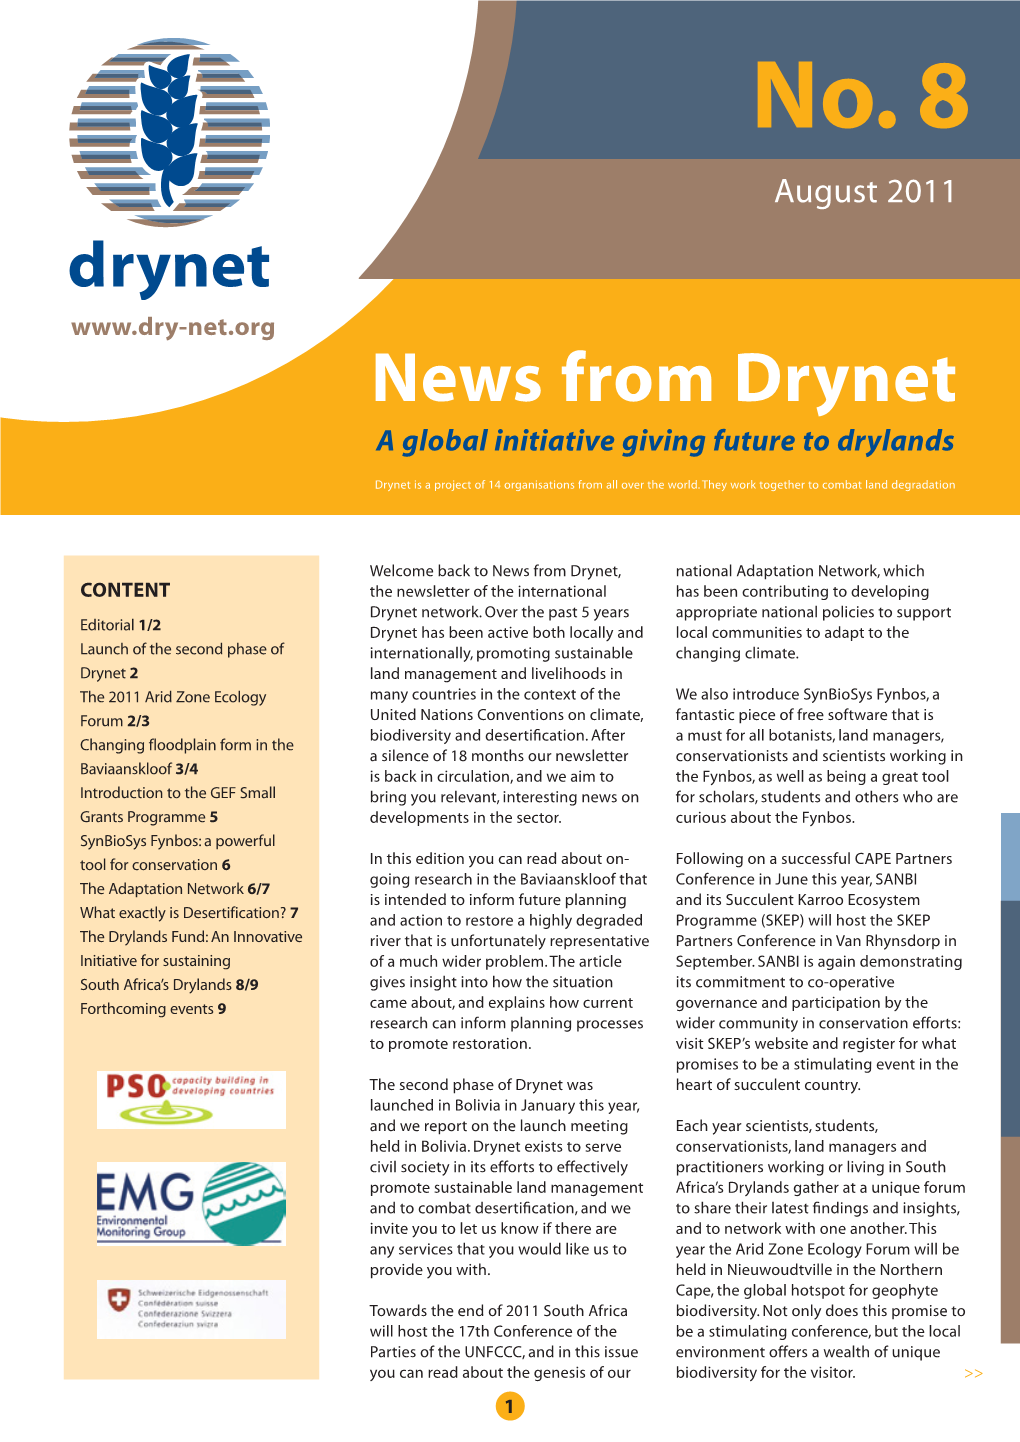 News from Drynet a Global Initiative Giving Future to Drylands